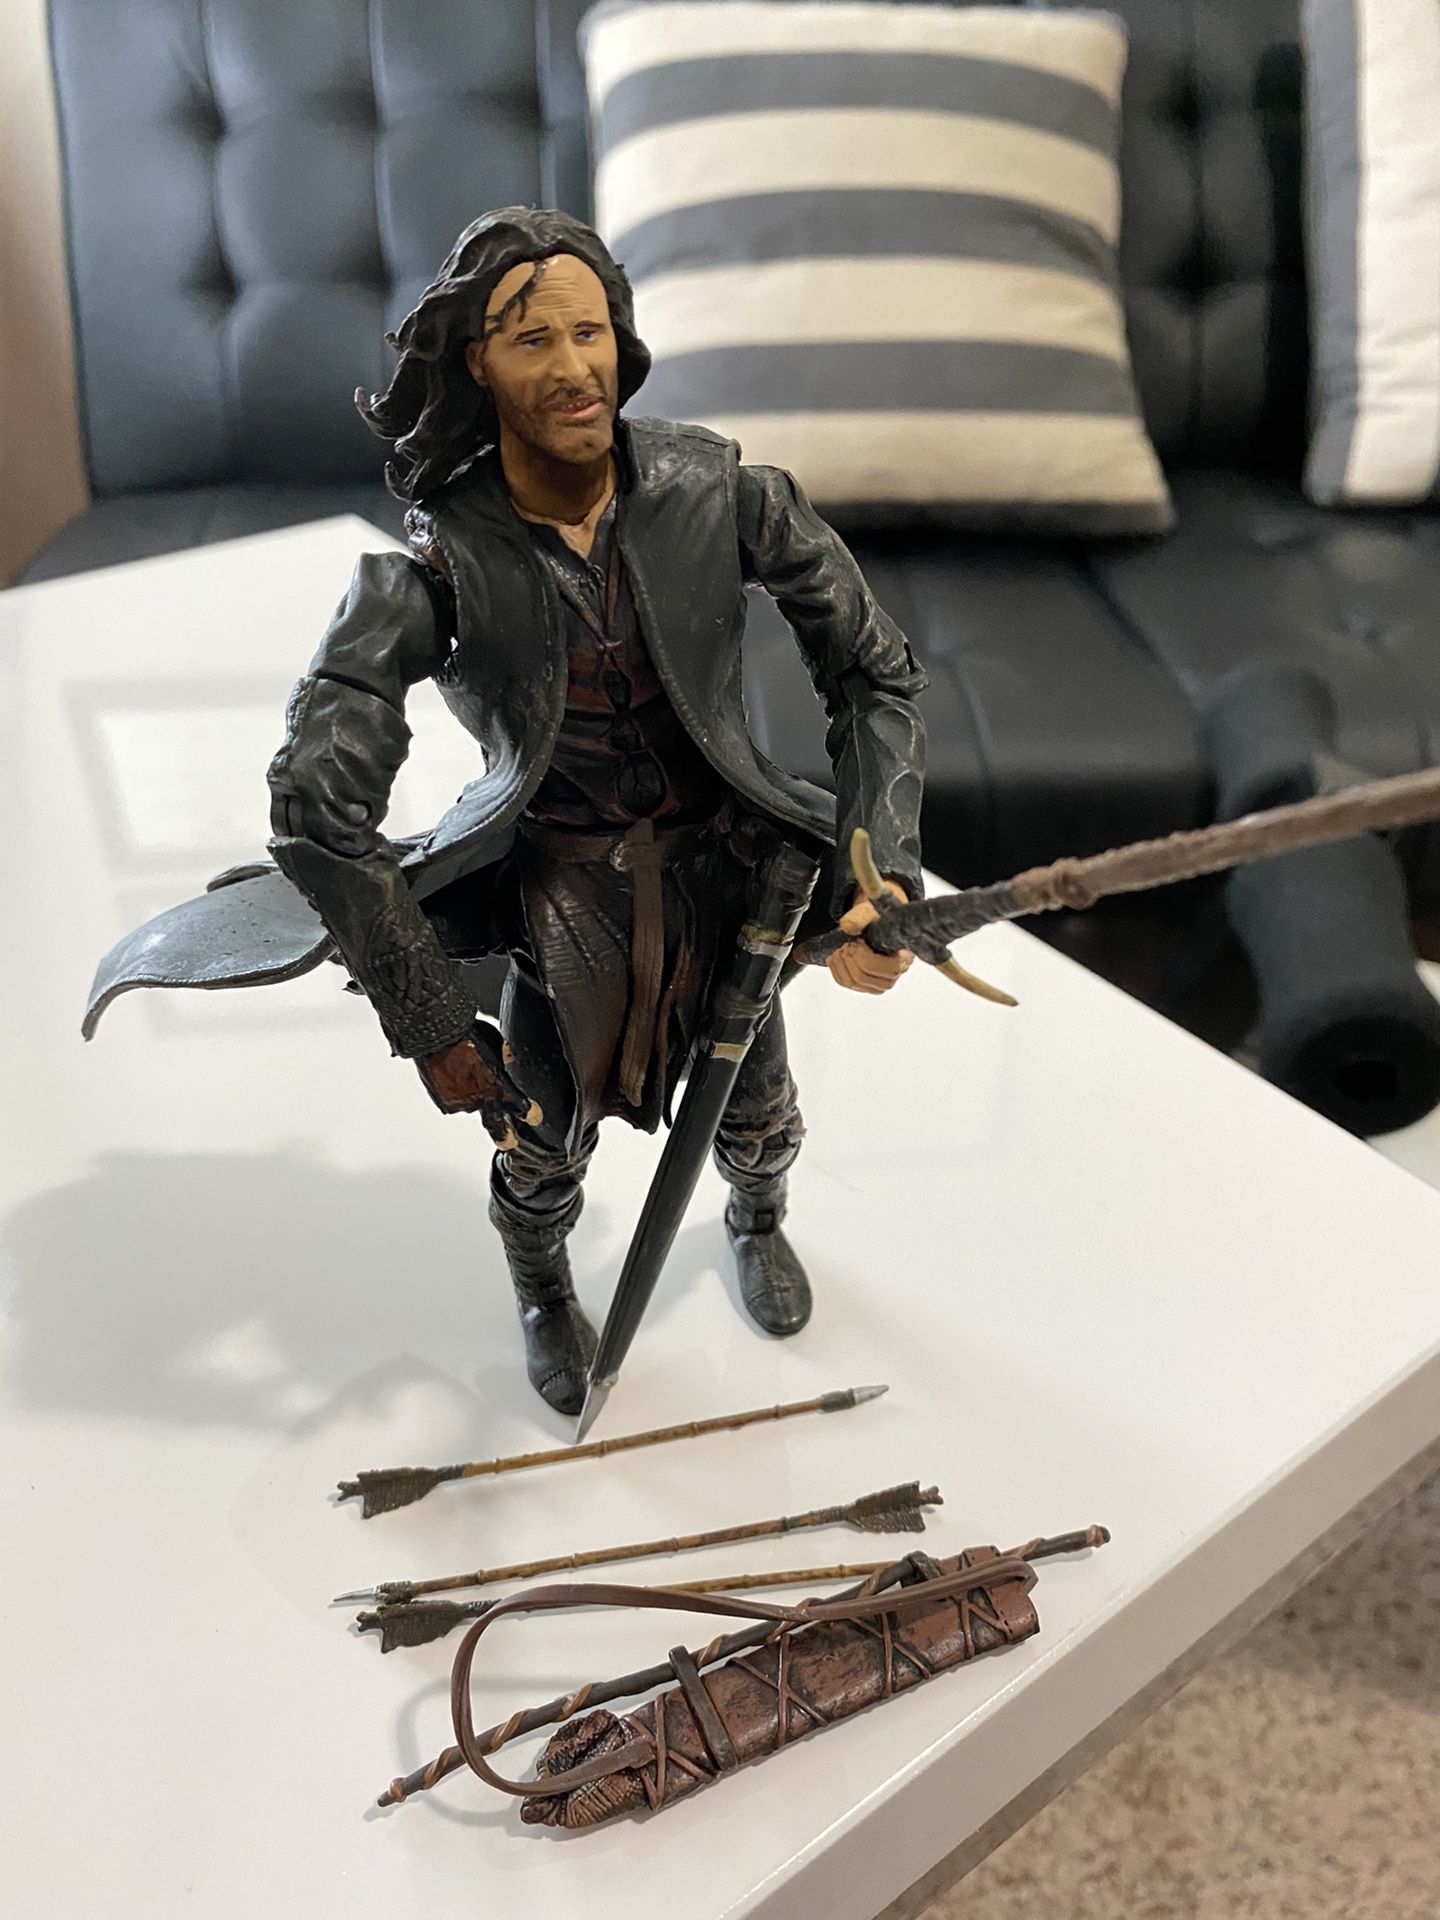 2002 Lord of the Rings Aragorn Action Figure LOTR collectable 6.5”